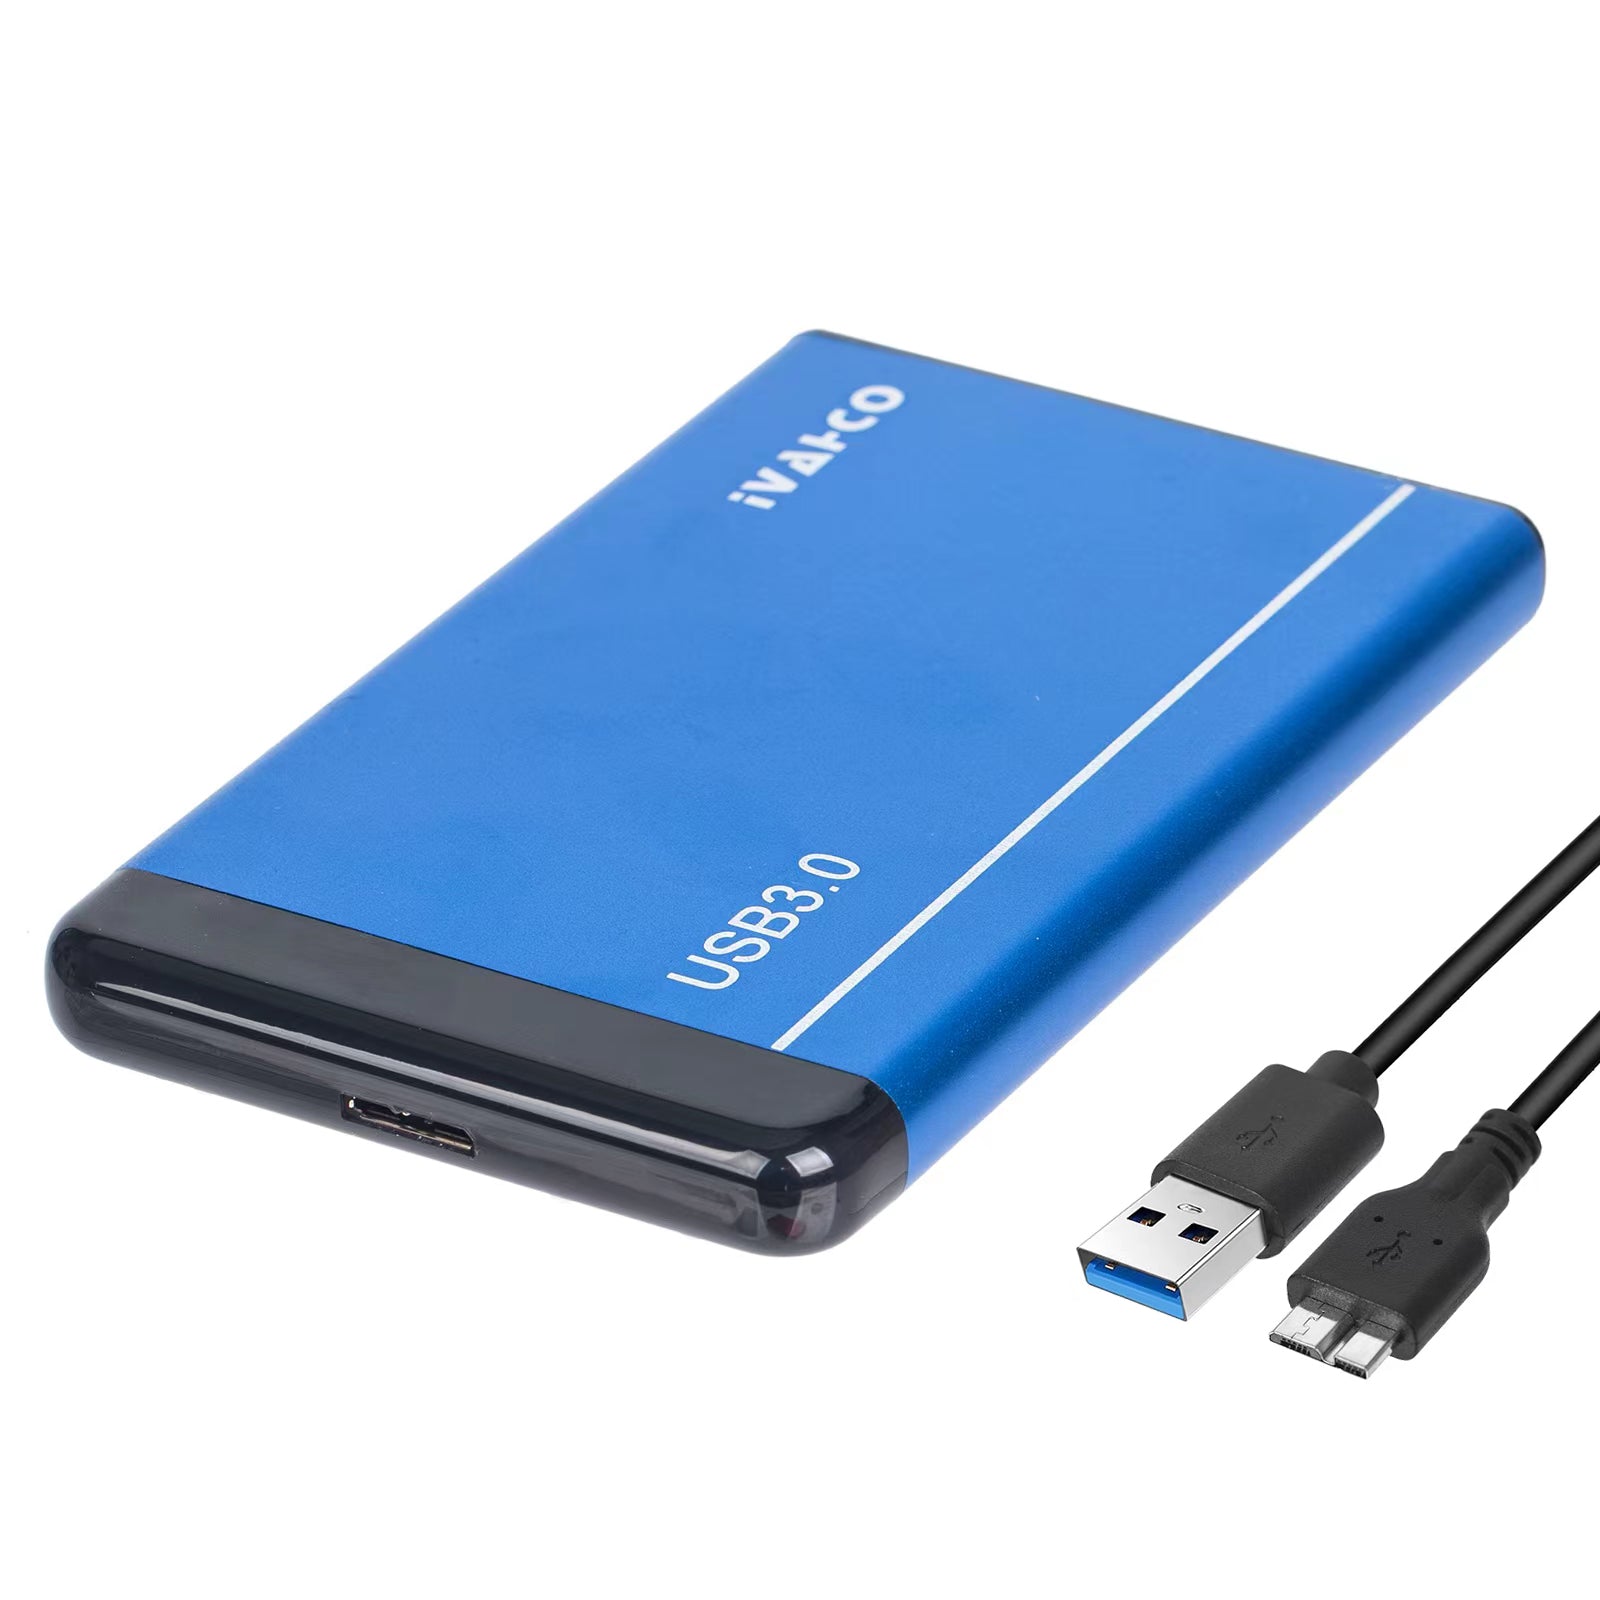 IVAHCO 320GB 2.5" HDD External Case Plug and Play USB3.0 Matte Hard Disk Enclosure with Data Cable - Blue